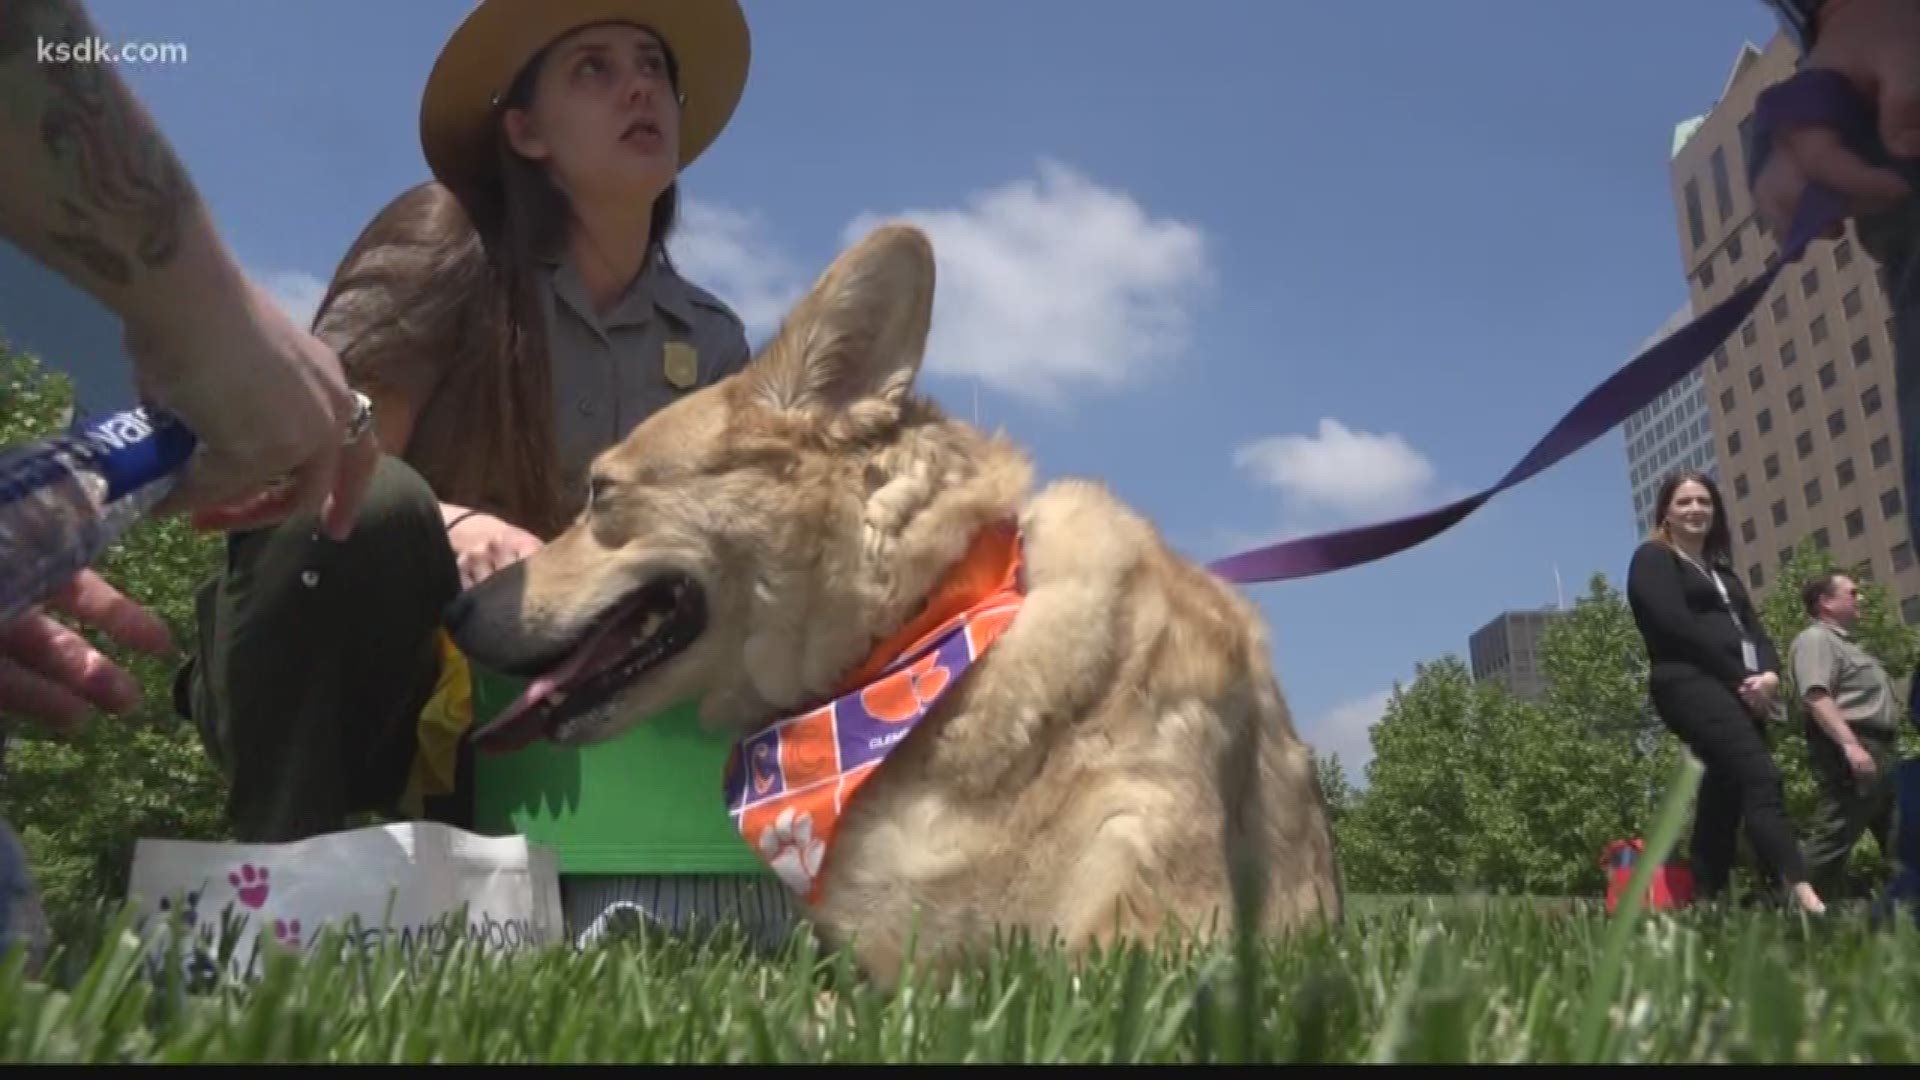 She checked many boxes off her bucket list including eating hamburgers at some of the best spots around St. Louis, raising awareness and support of animal organizations across the country and getting lots of belly rubs and puppy kisses.